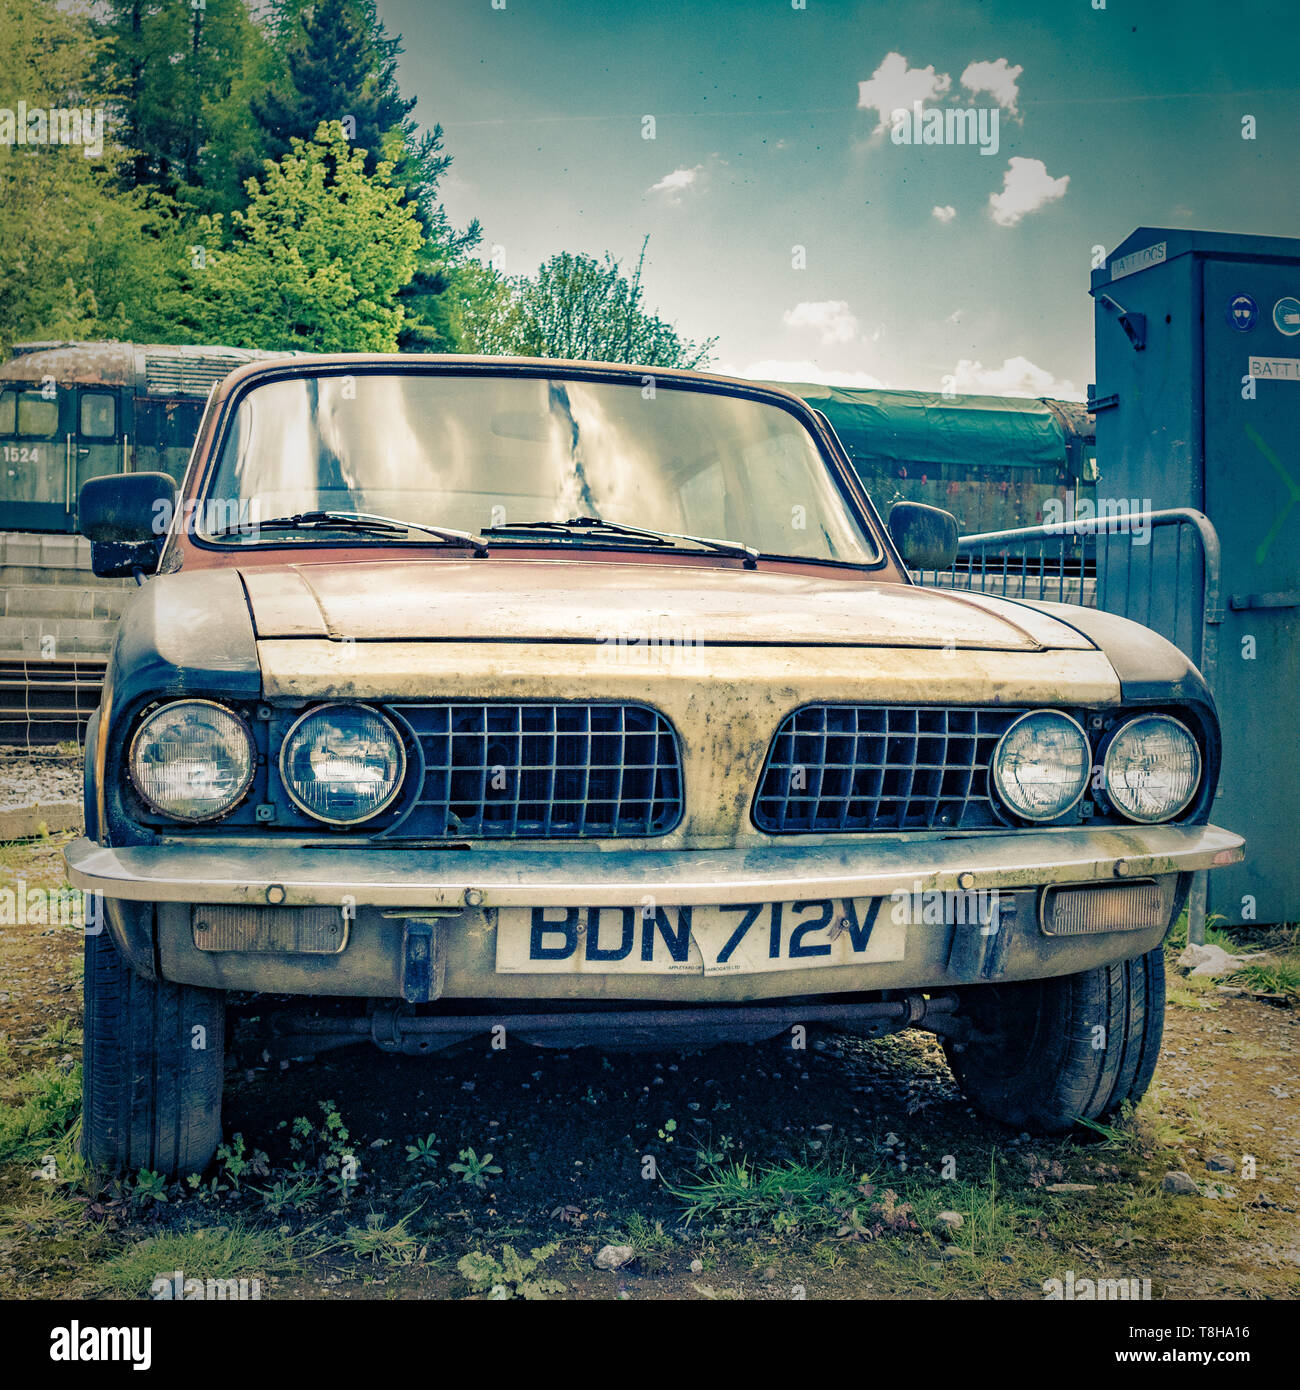 1980 Triumph car in need of restoration Stock Photo